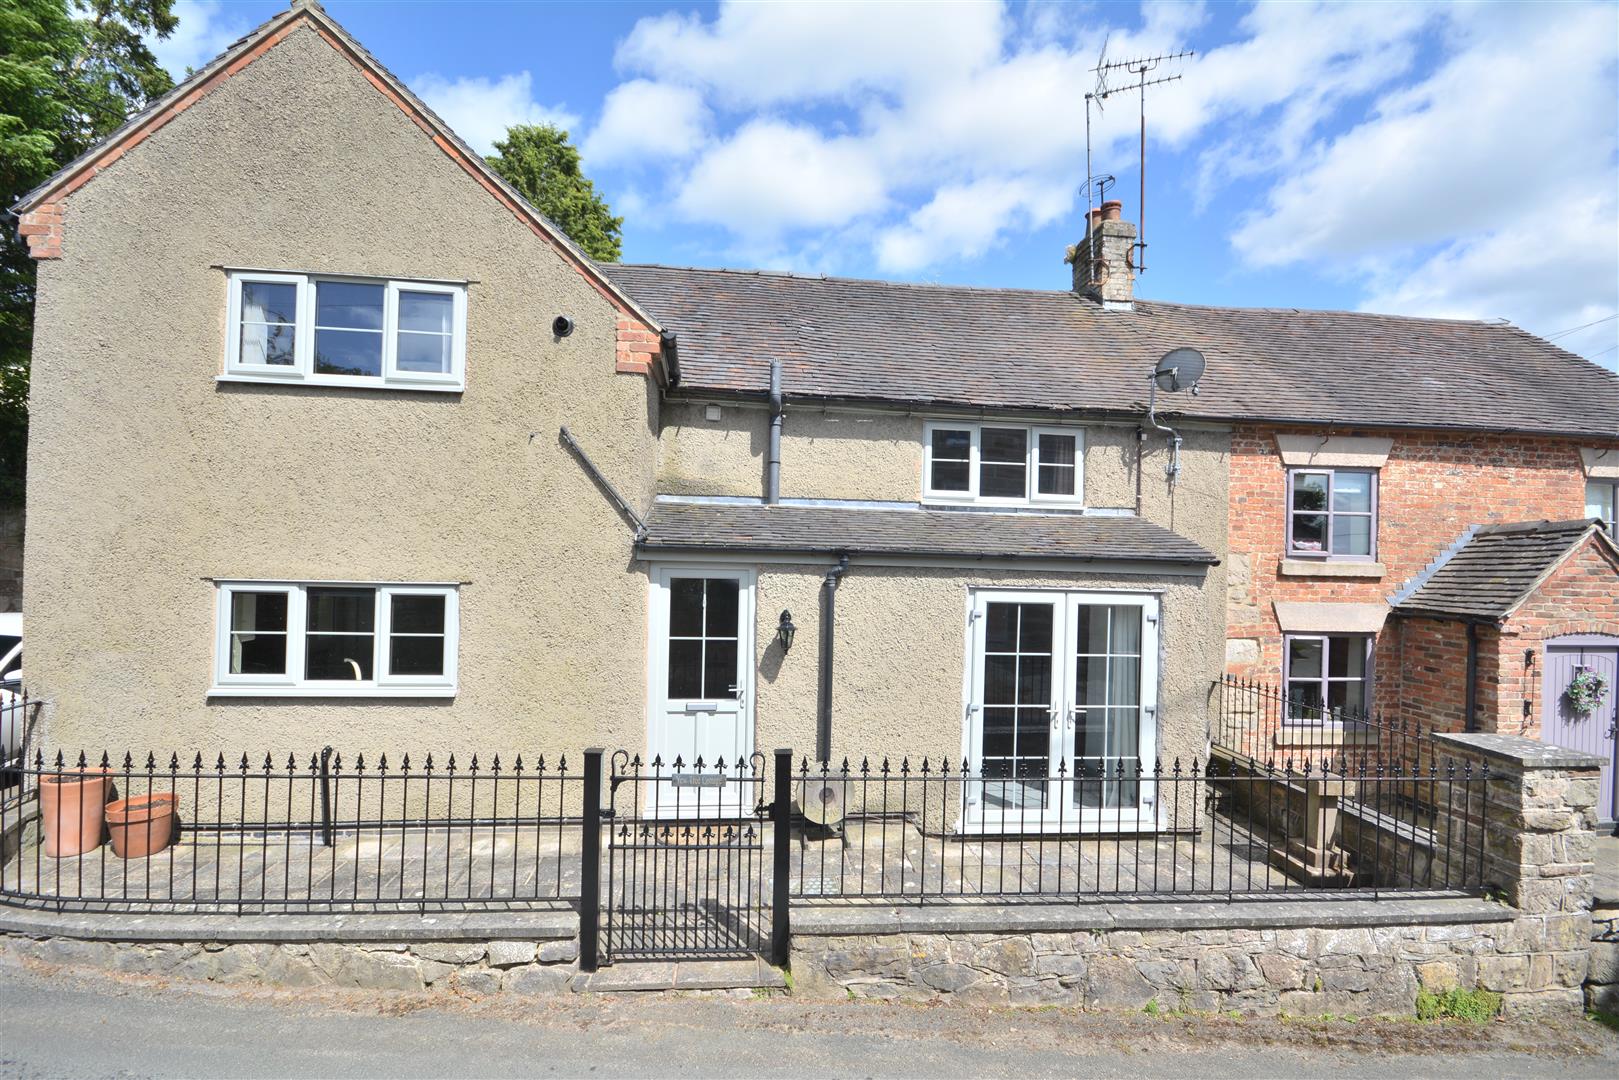 Yew Tree Cottage, Gallowstree Lane, Upper Mayfield, Ashbourne, DE6 2HQ Banner